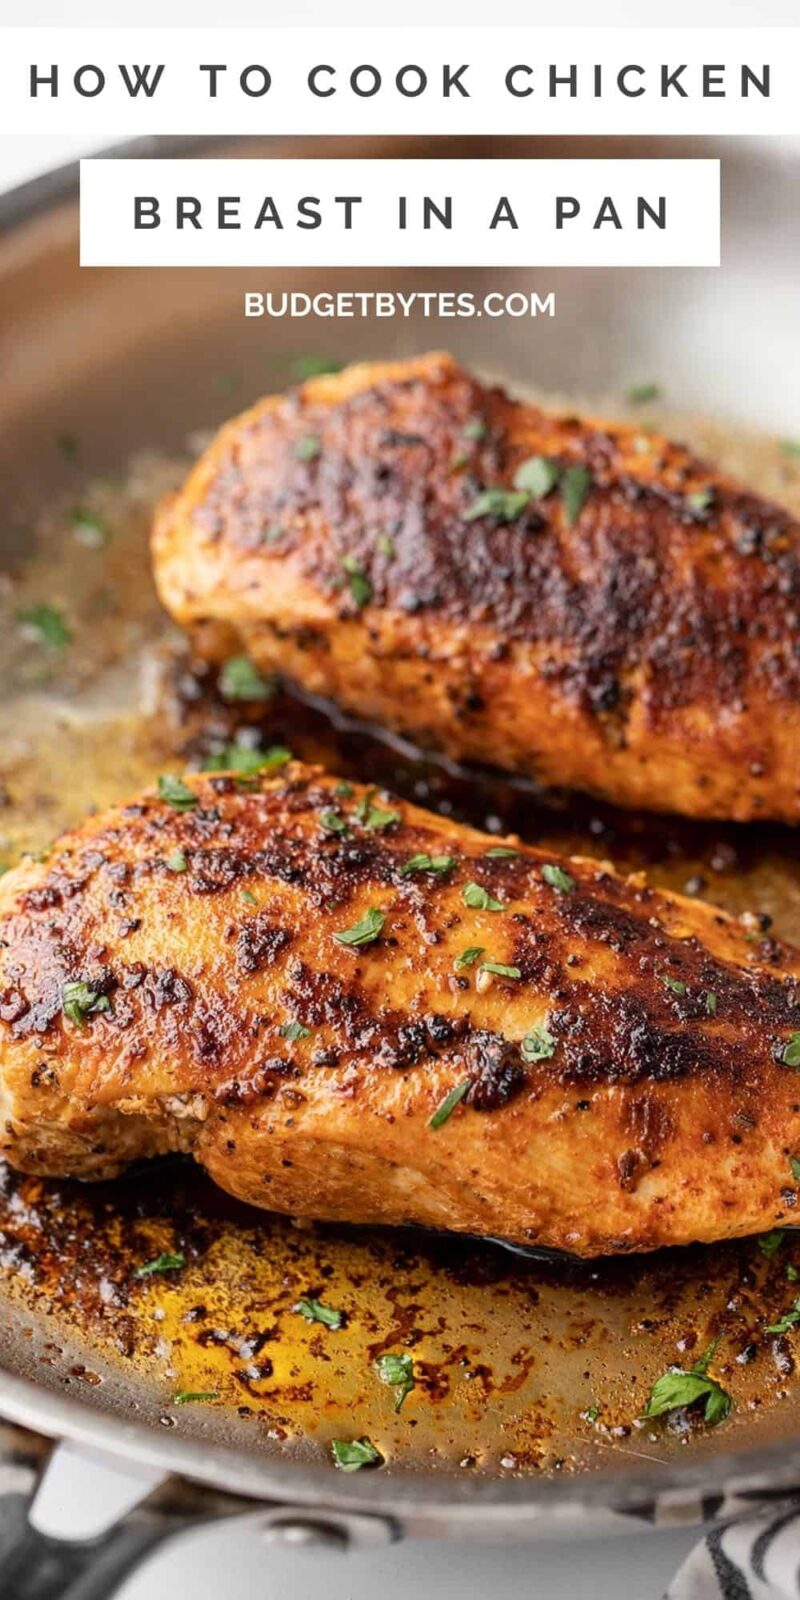 https://www.budgetbytes.com/wp-content/uploads/2021/12/How-to-Cook-Chicken-Breast-in-a-Pan-PIN2-800x1600.jpg